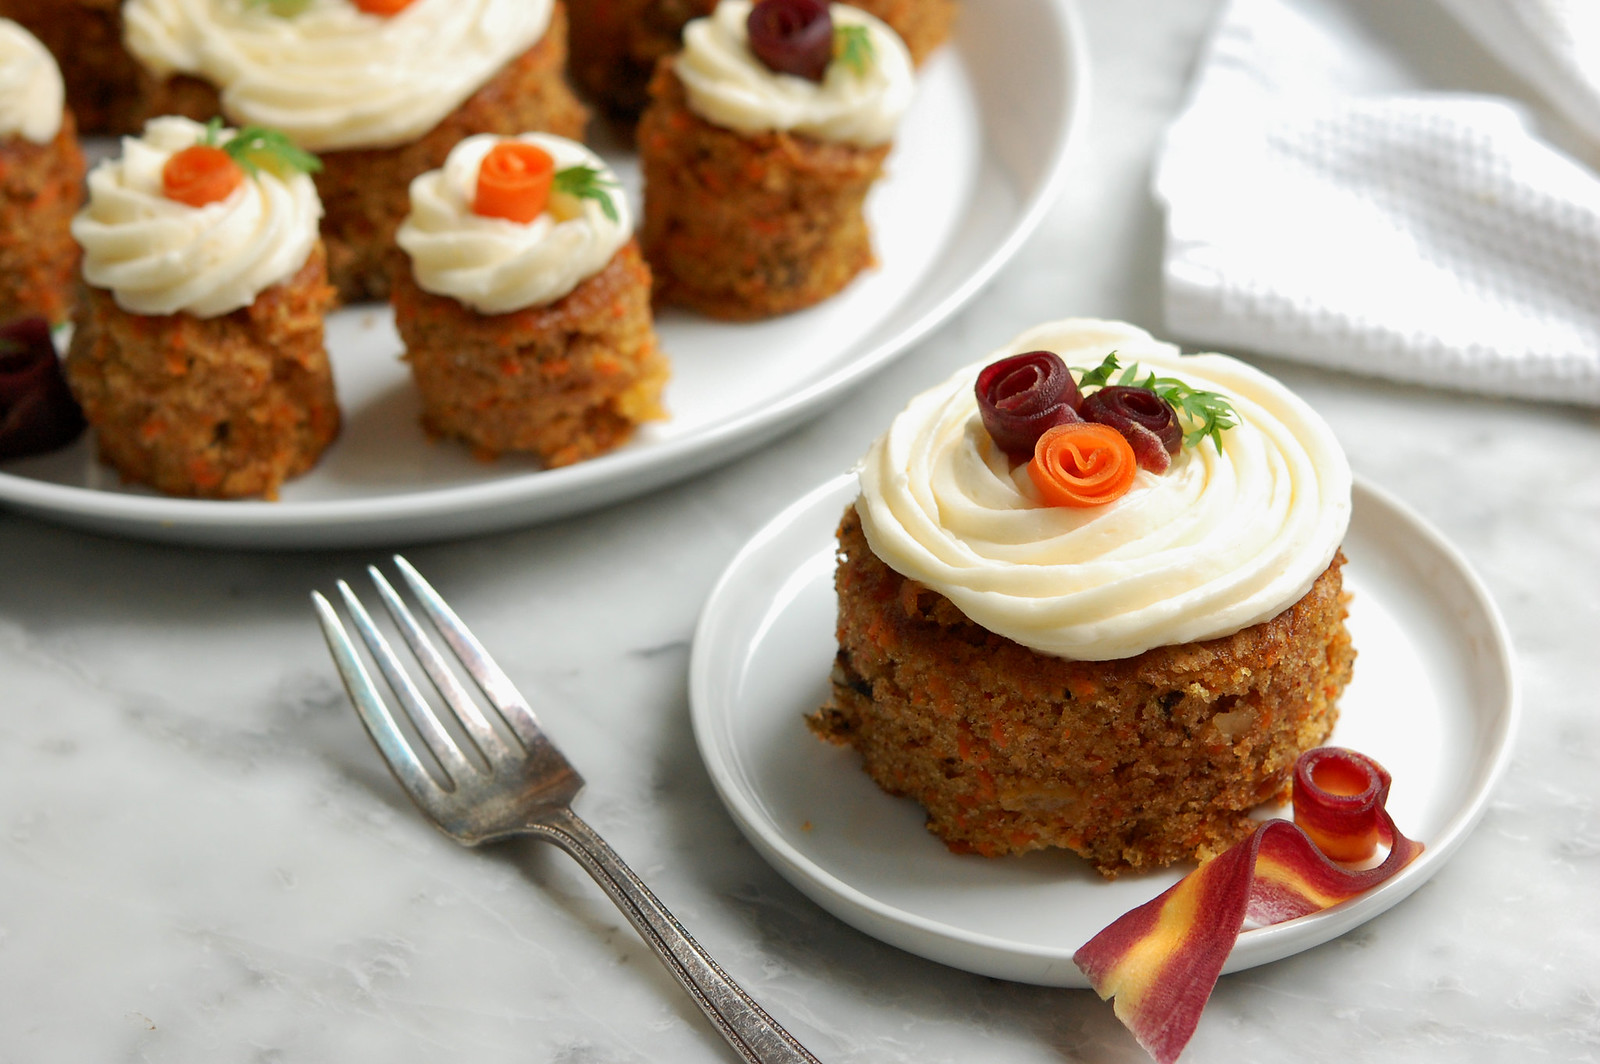 Carrot Cake Decorating Ideas: Carrot Cakes with Flair 2